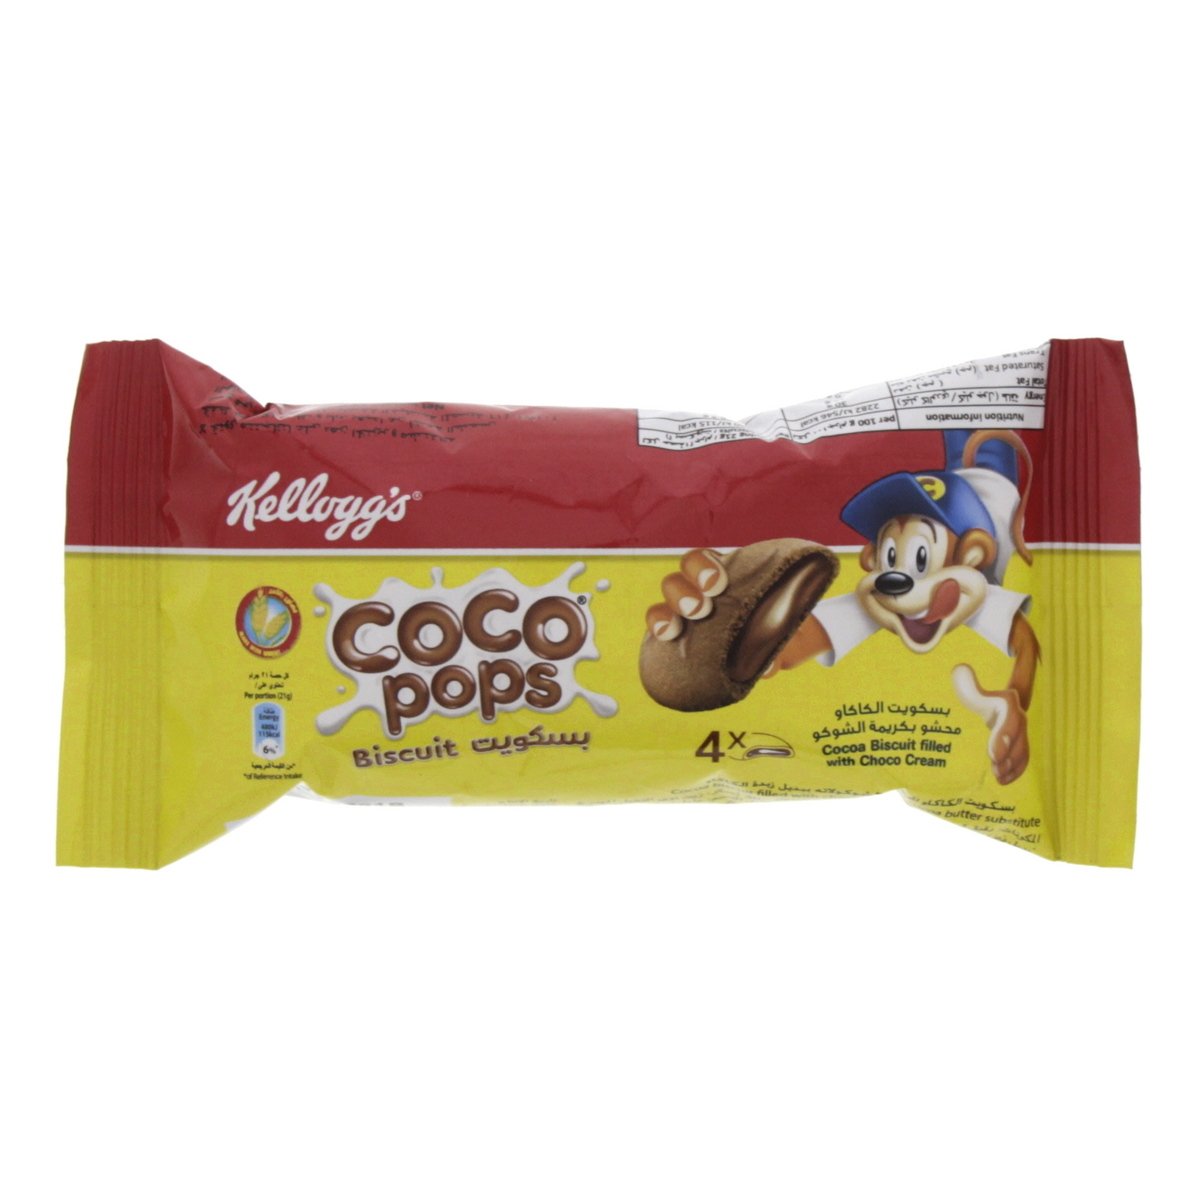 Kellogg's Coco Pops Biscuit Cocoa Biscuit Filled With Choco Cream 42 g